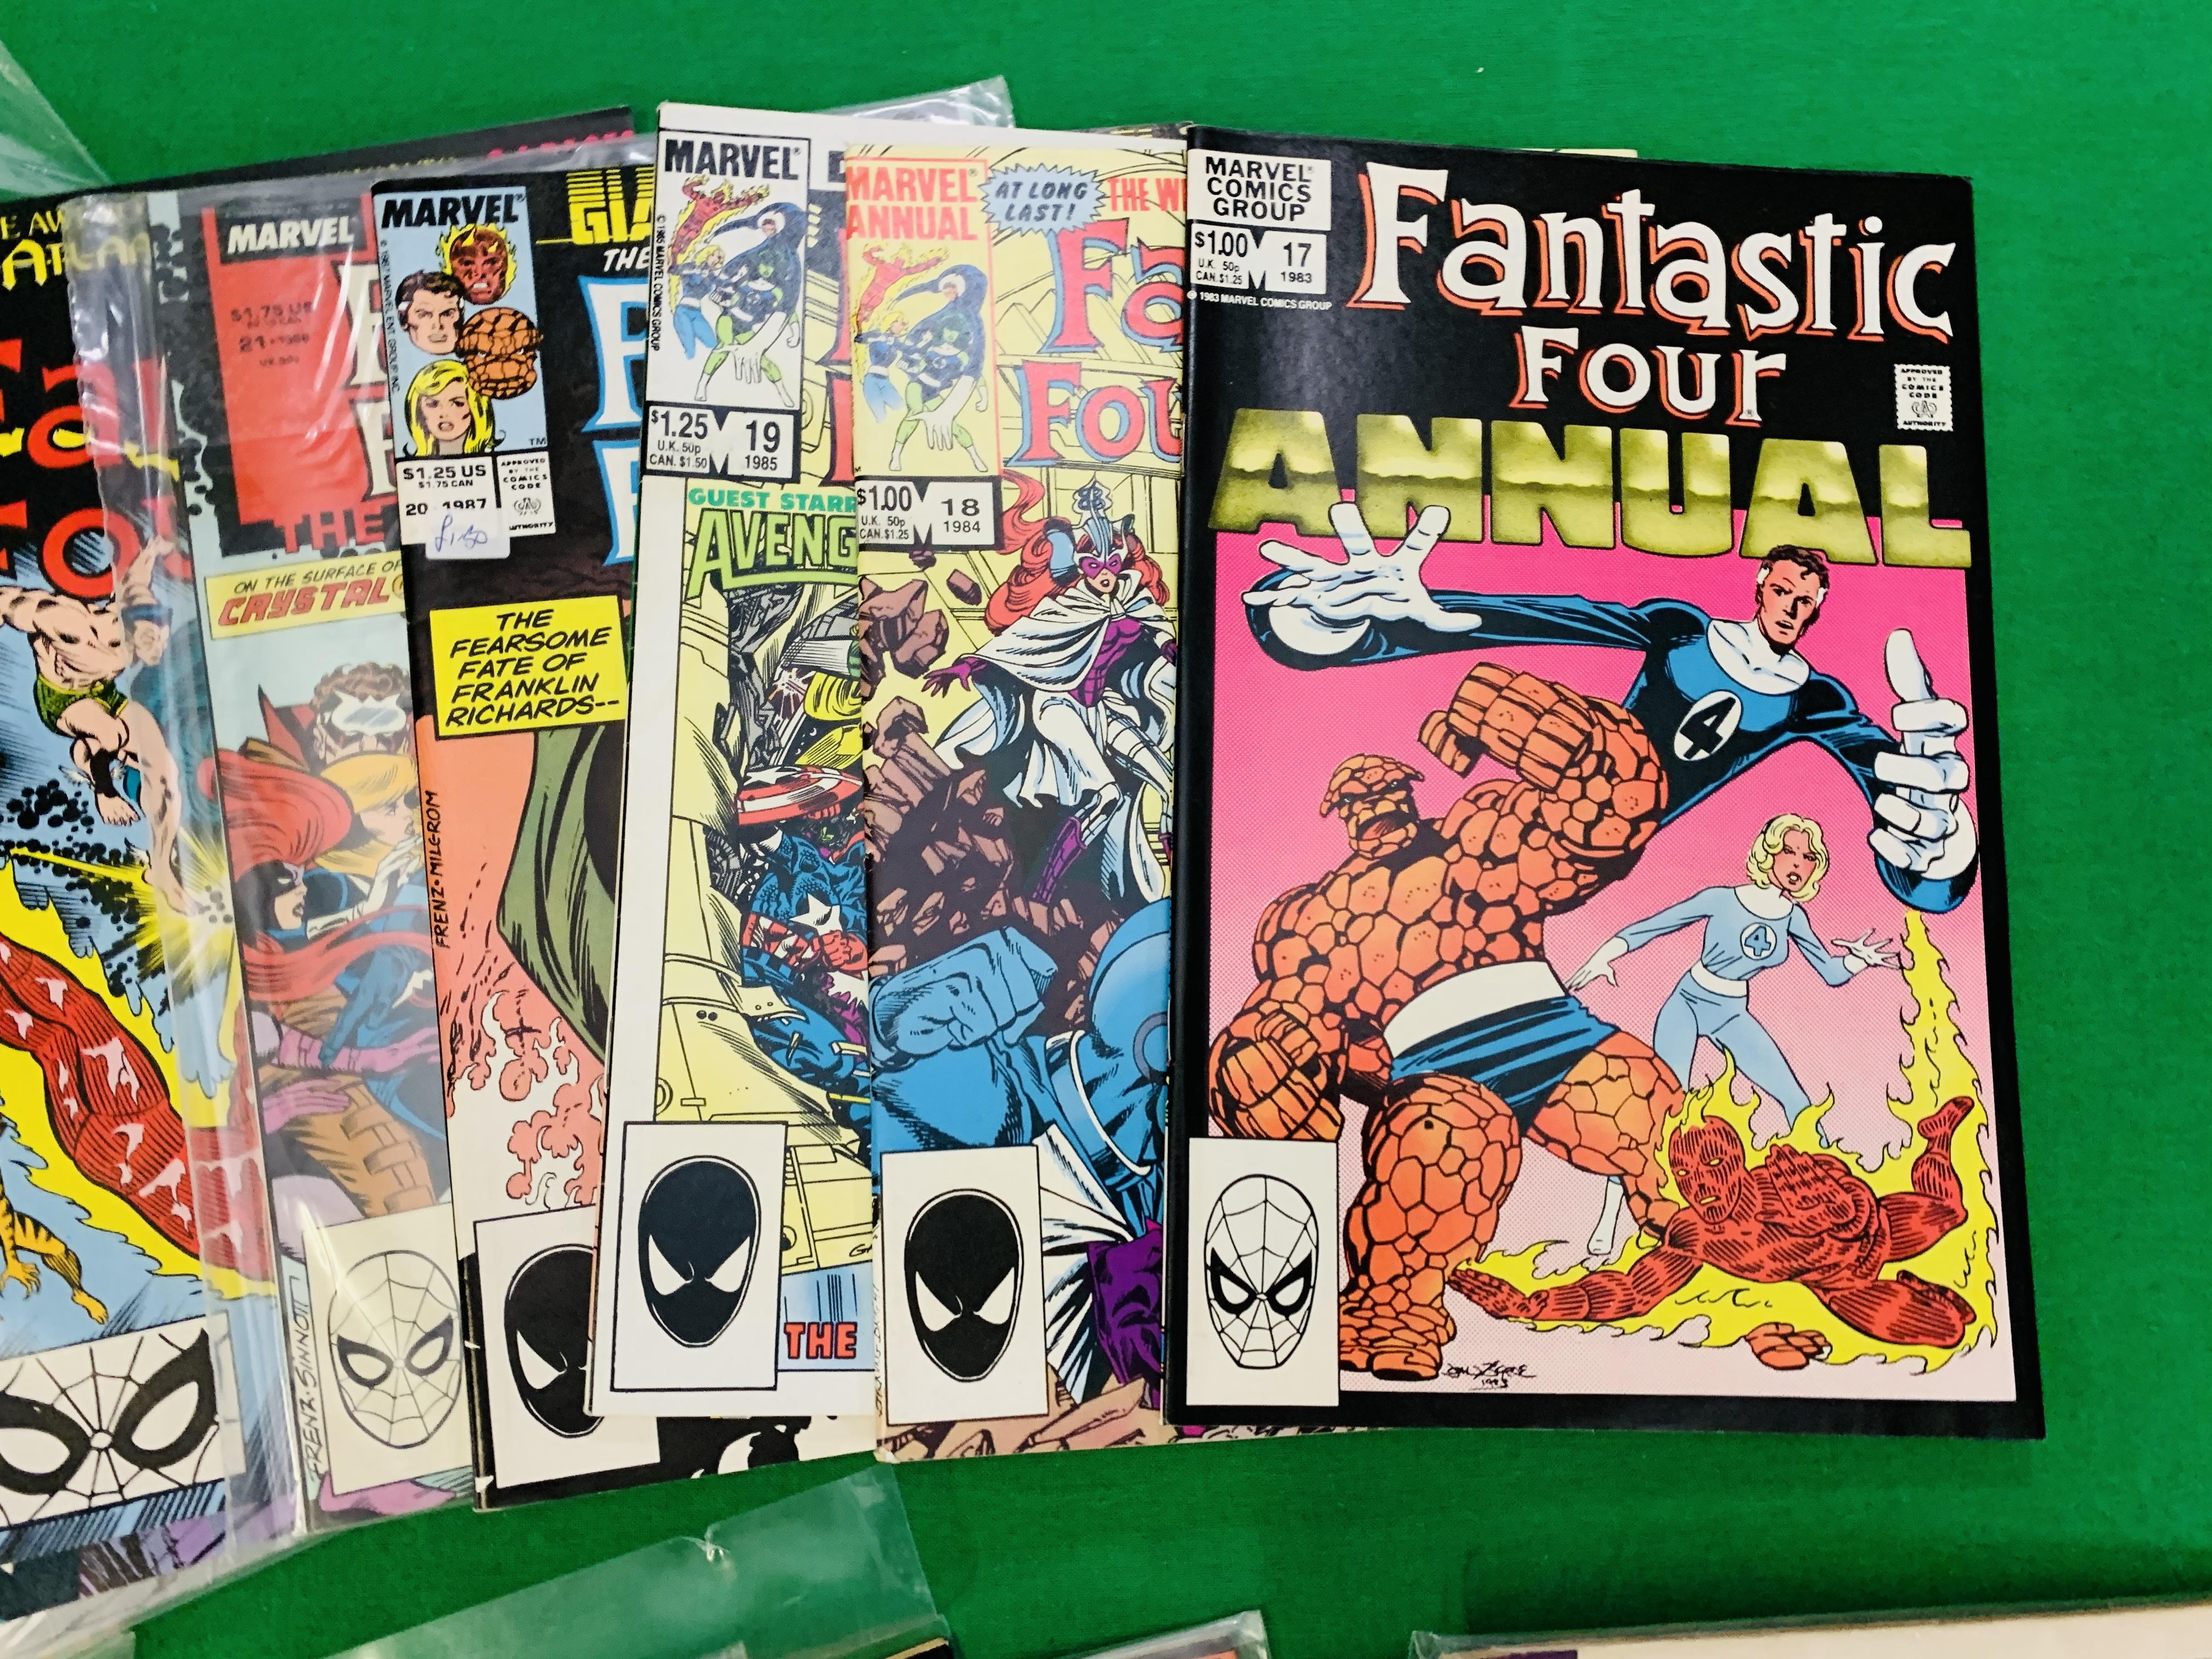 MARVEL COMICS FANTASTIC FOUR KINGSIZE ANNUALS NO. 3, 5 - 6, 11 - 27 FROM 1965. - Image 4 of 5